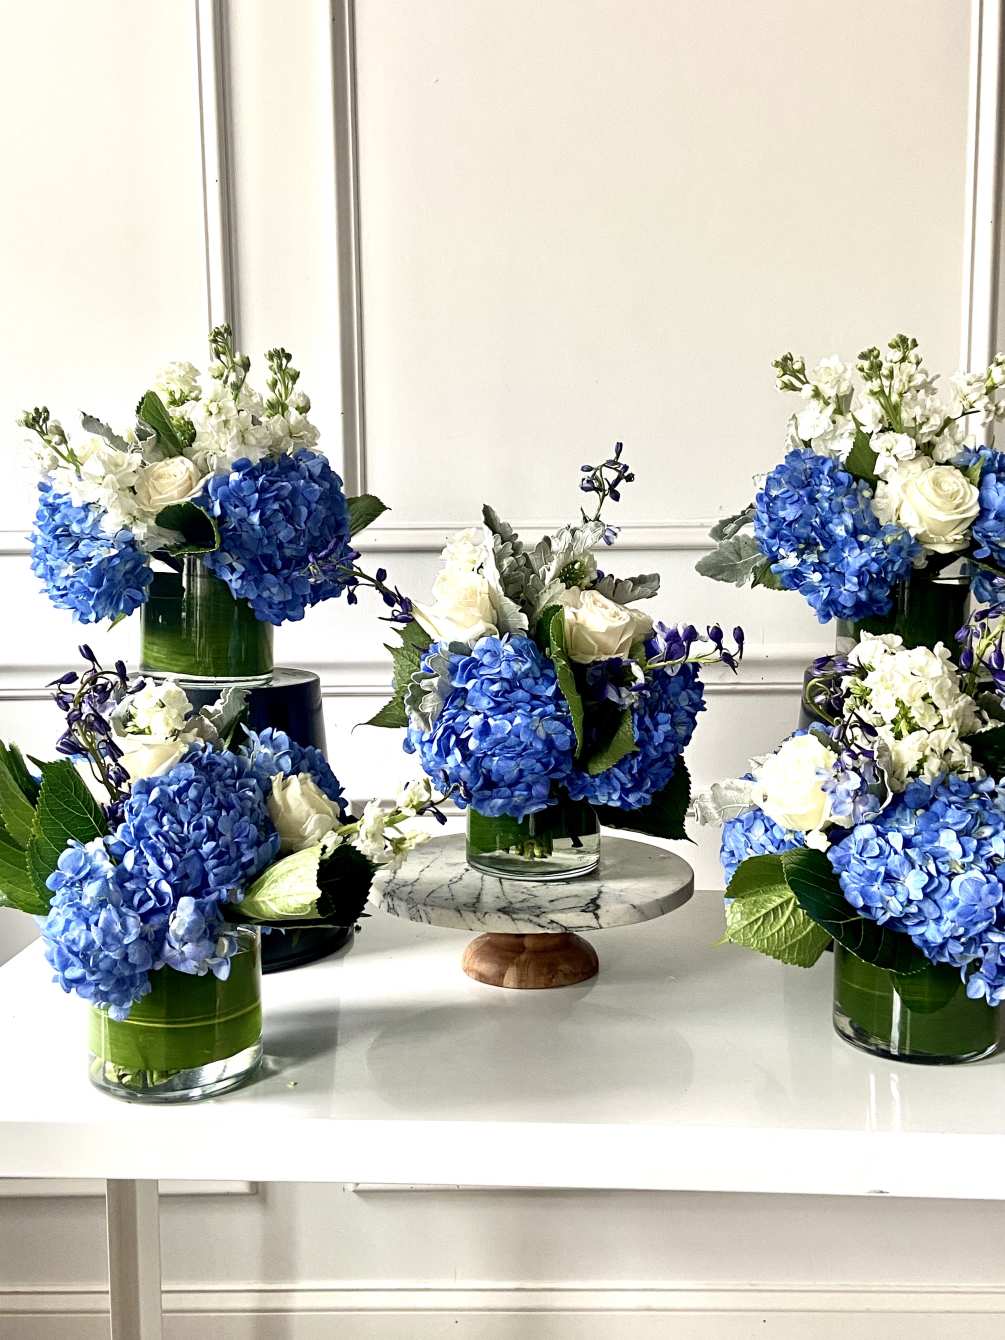 Our Blue Collection showcases shocking blue hydrangea and classic white roses. 
These